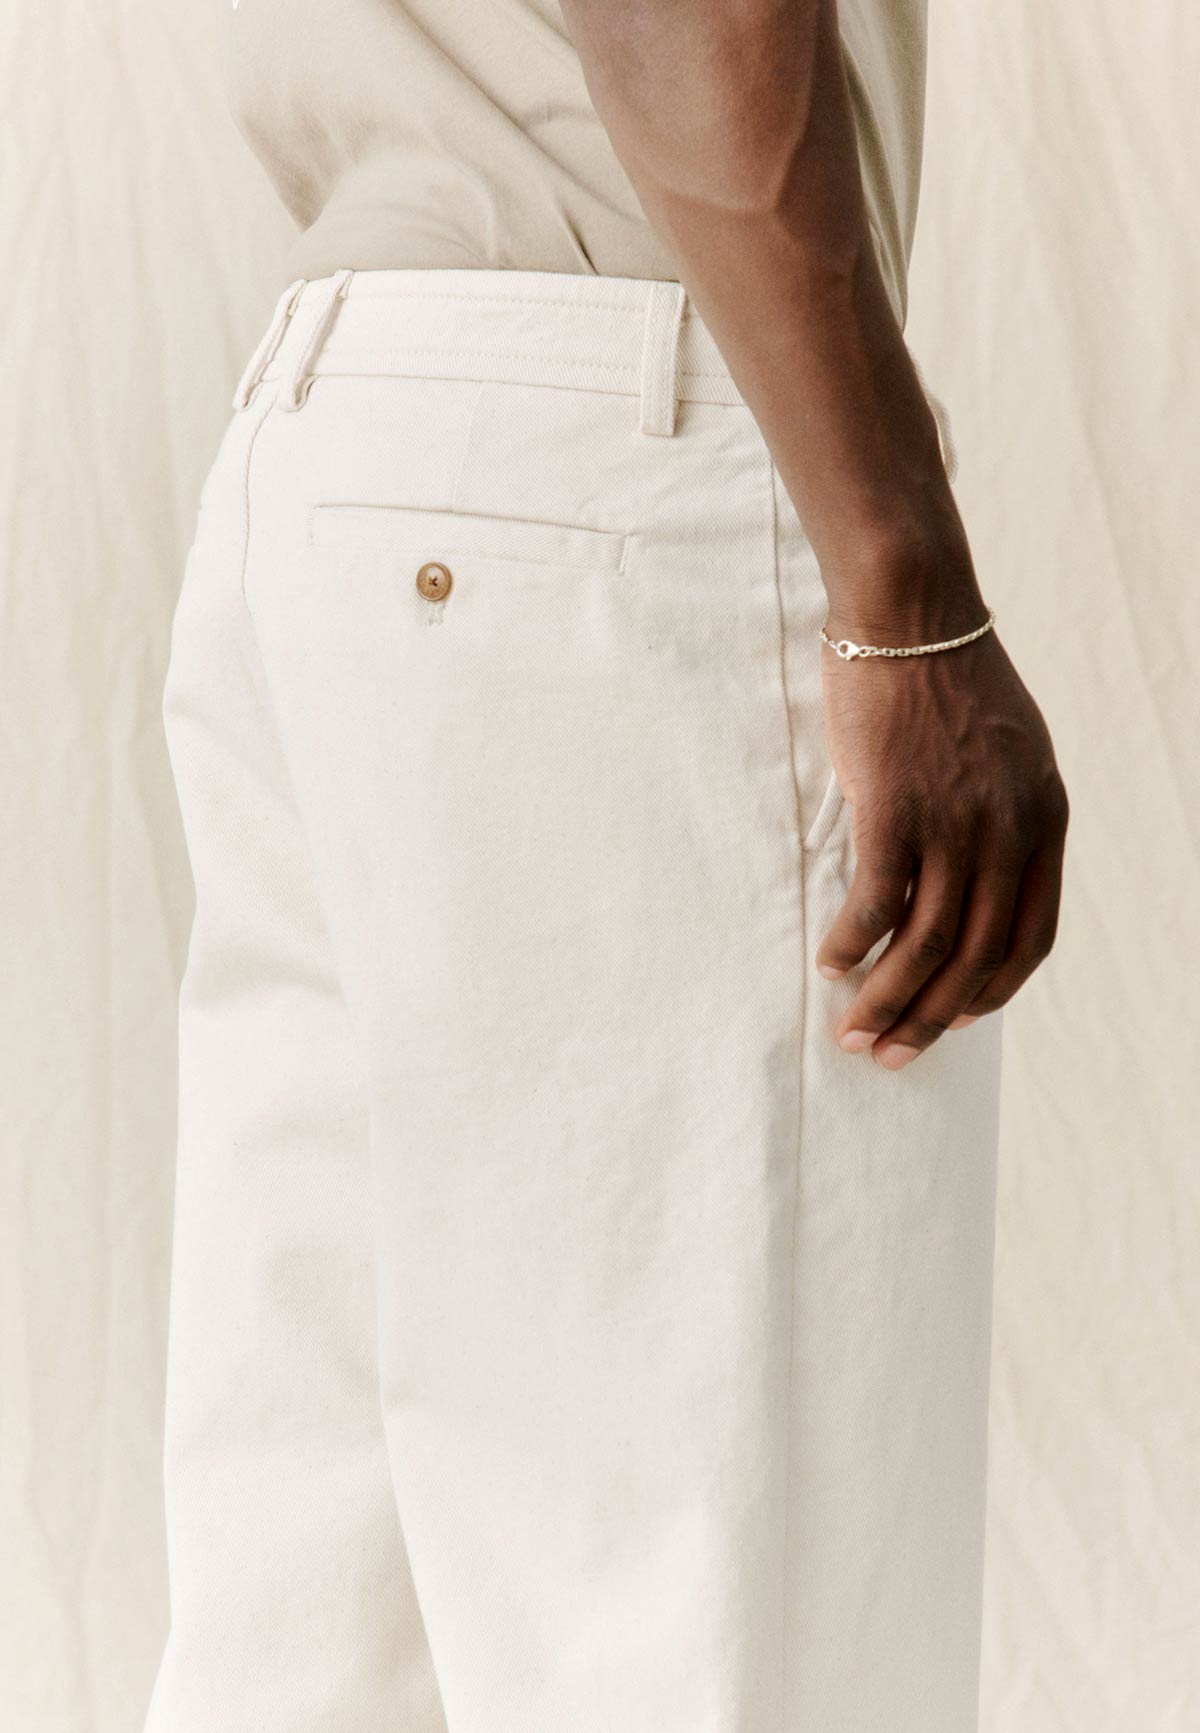 AGENCY OFF WHITE PANTS - Moeon